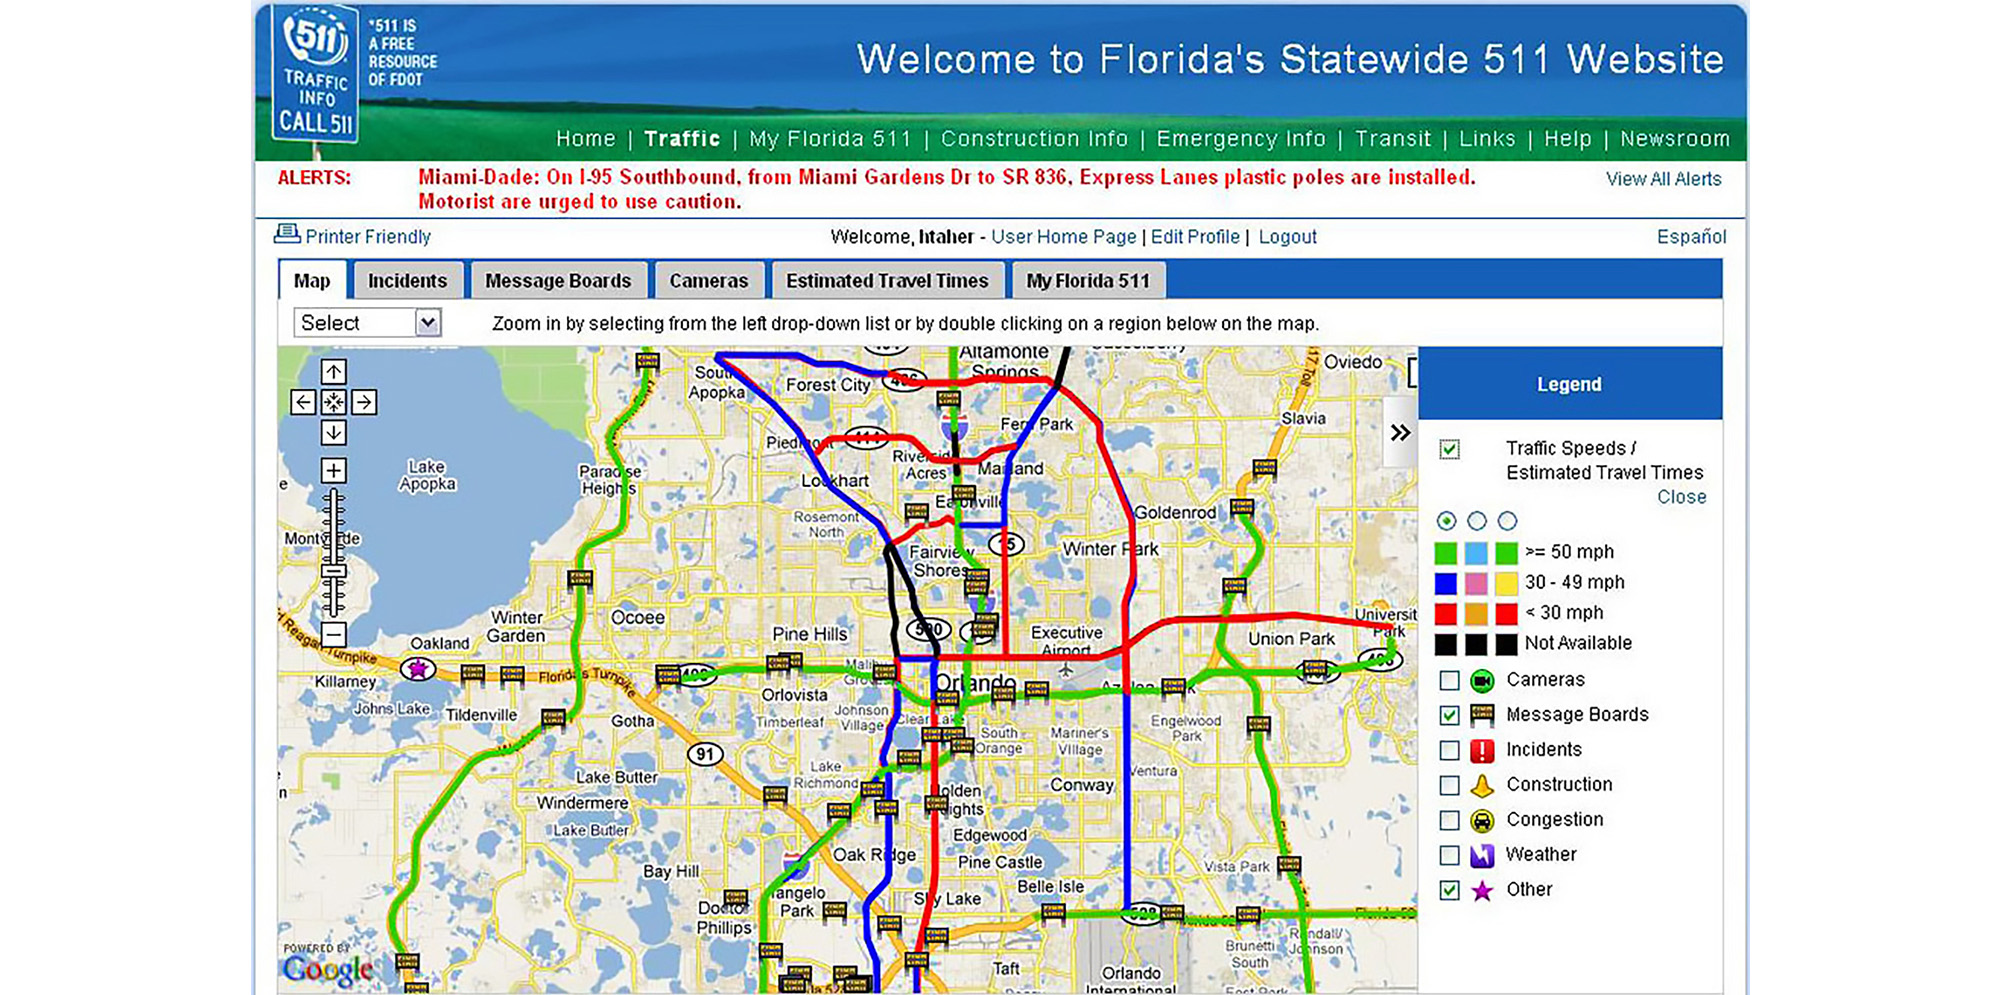 Florida511 map. For full text, download project PDF below.